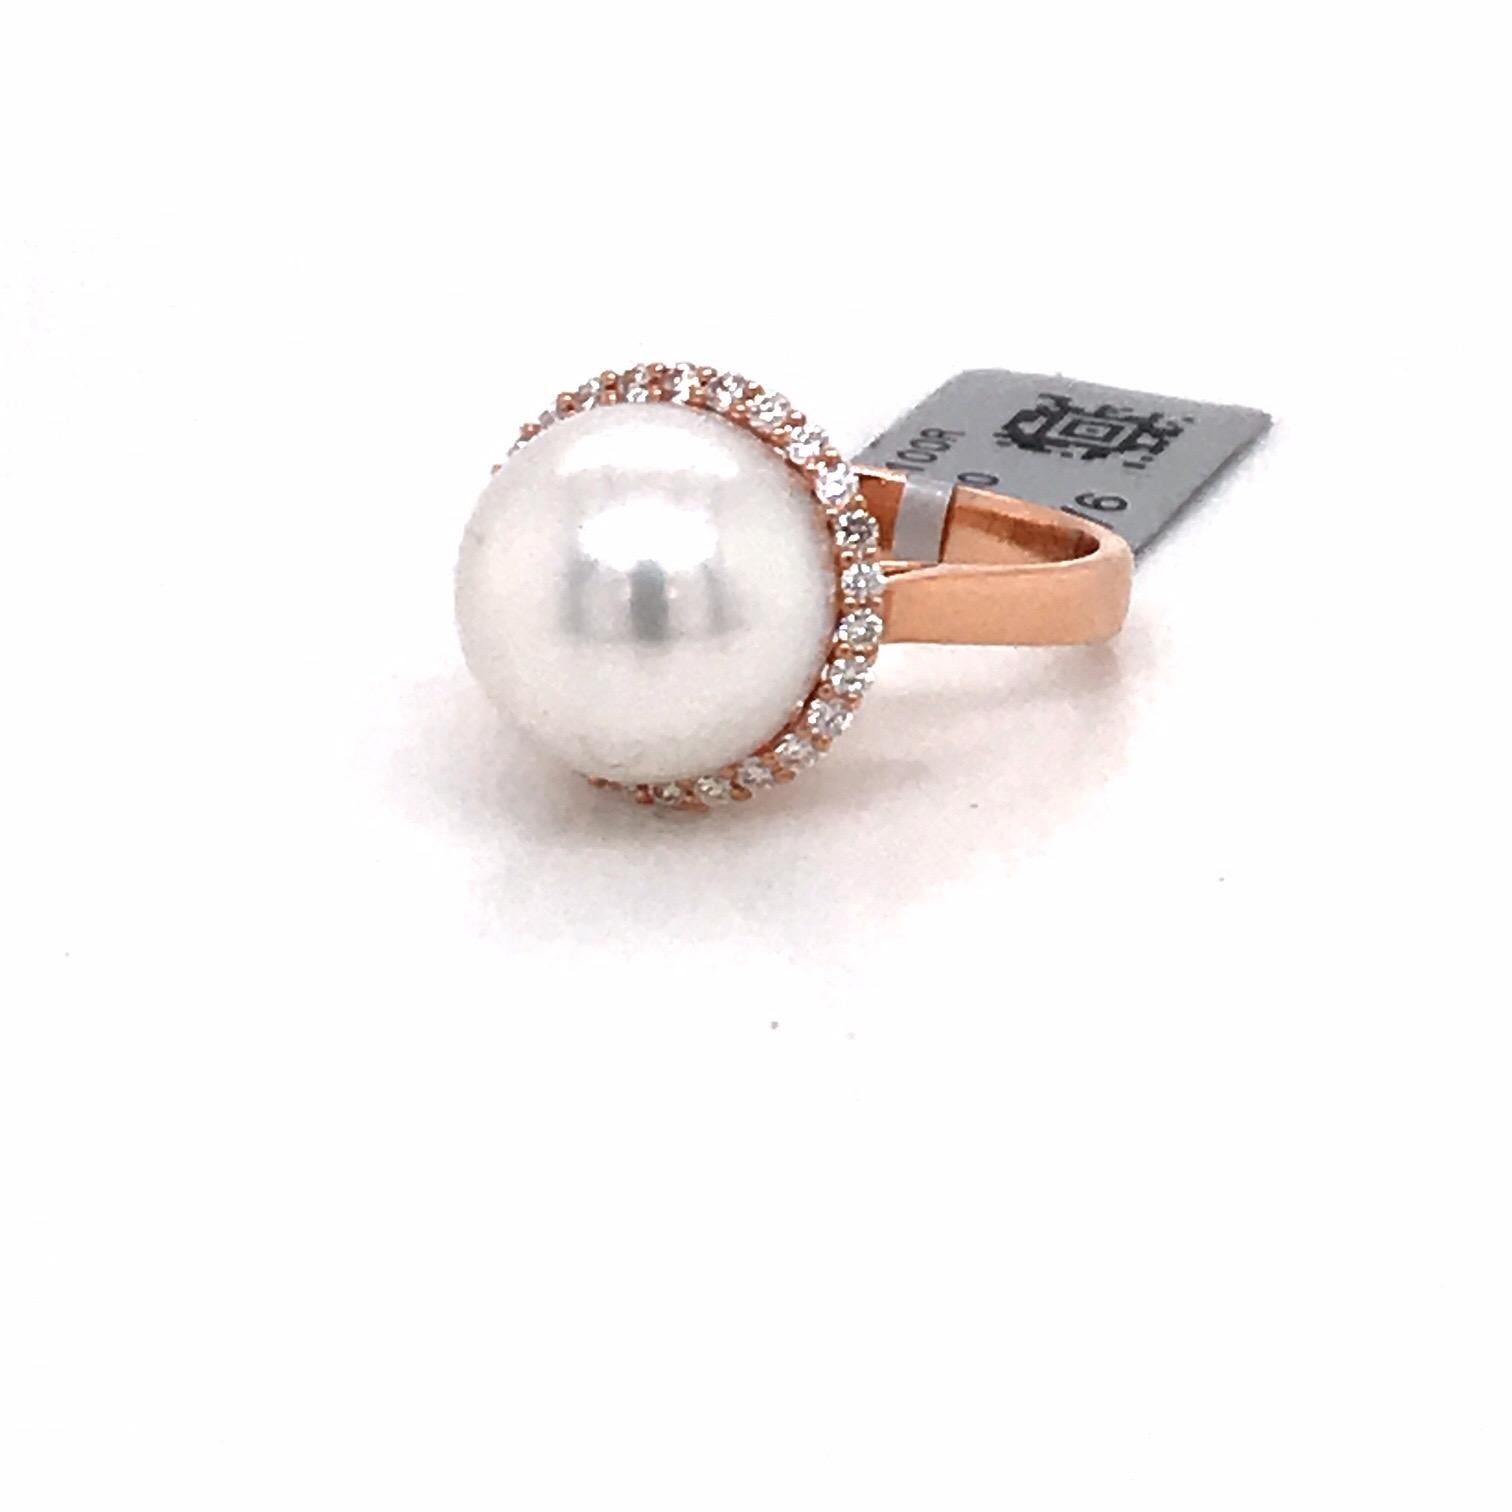 18K Rose gold ring featuring one South Sea Pearl measuring 13-14 mm flanked with 26 round brilliants weighing 0.32 carats.
Color G-H 
Clarity SI

Measurements: 
South Sea Pearl: 12-13 MM
Diamond Halo: 19.8 MM
Height On Finger: 19.7 MM

Ring can be